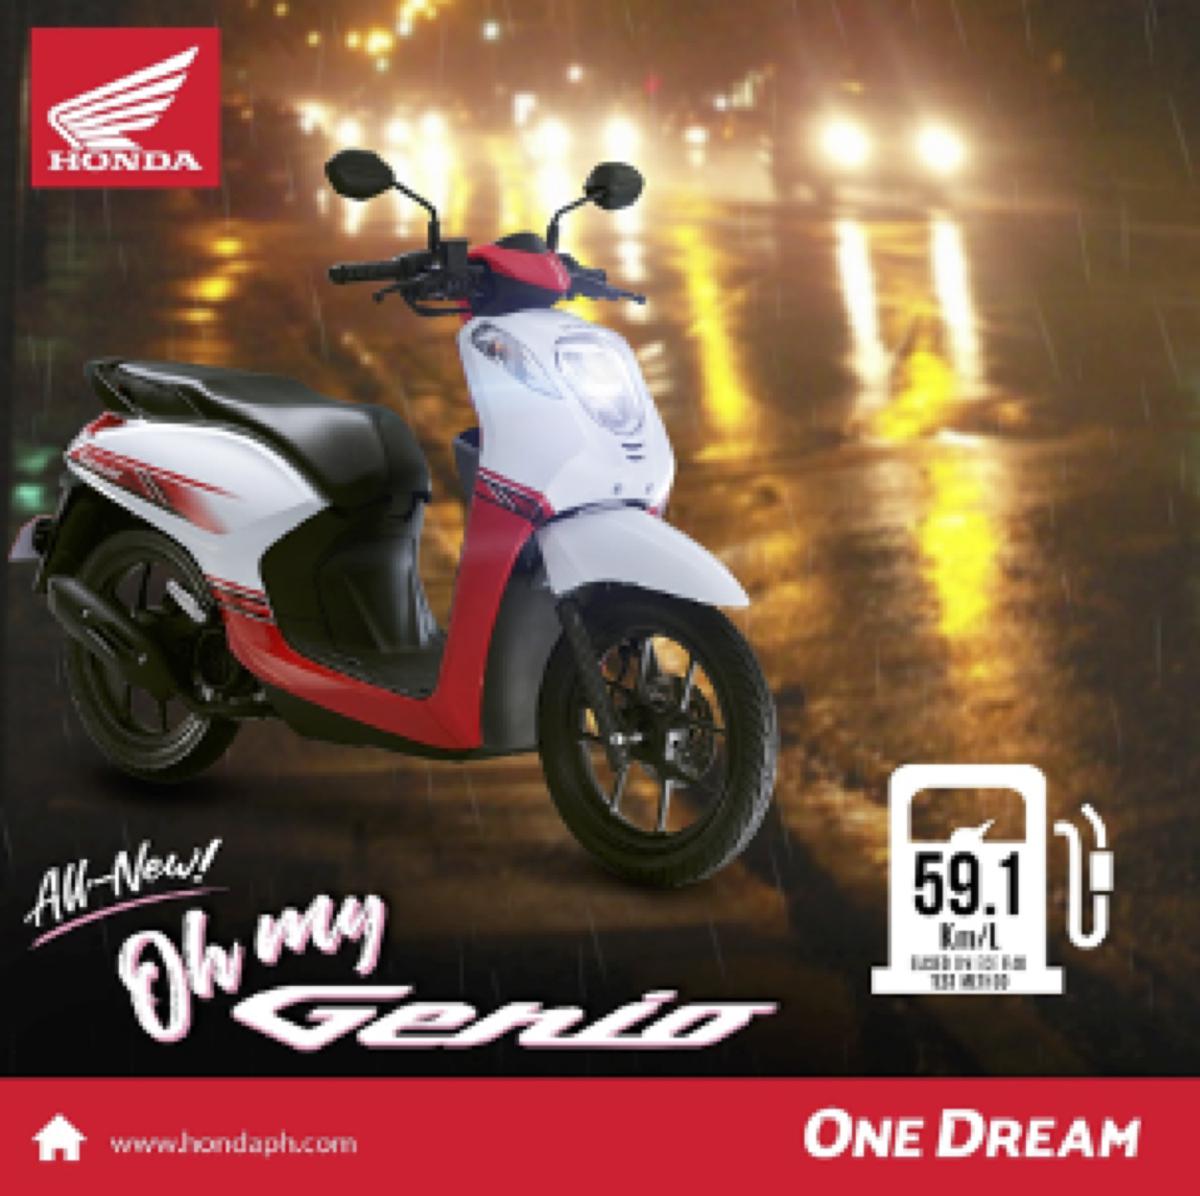 Honda Shares Safety Tips For Riding A Motorcycle In The Rain Gadgets Magazine